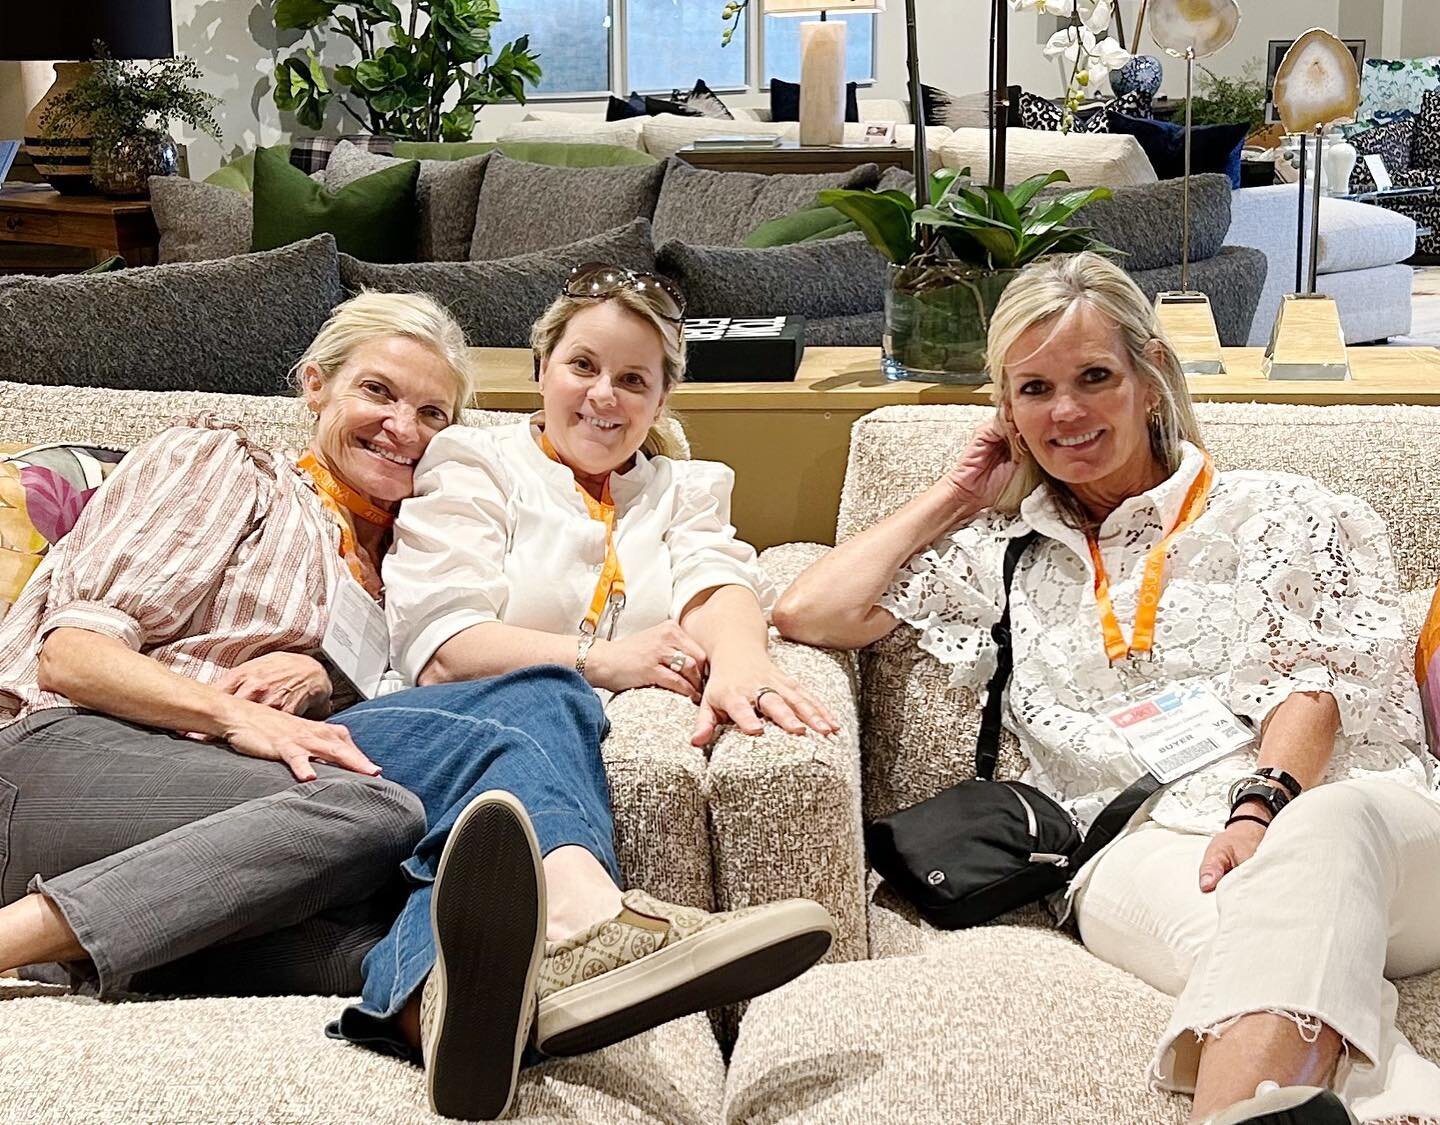 Another day shopping in Highpoint! We found some great things @crlaine including these big fabulous chaises! #bridgetbearistyle #rvadesigner #designingwomen #shoptilwedrop #highpointmarket #hptmkt2023